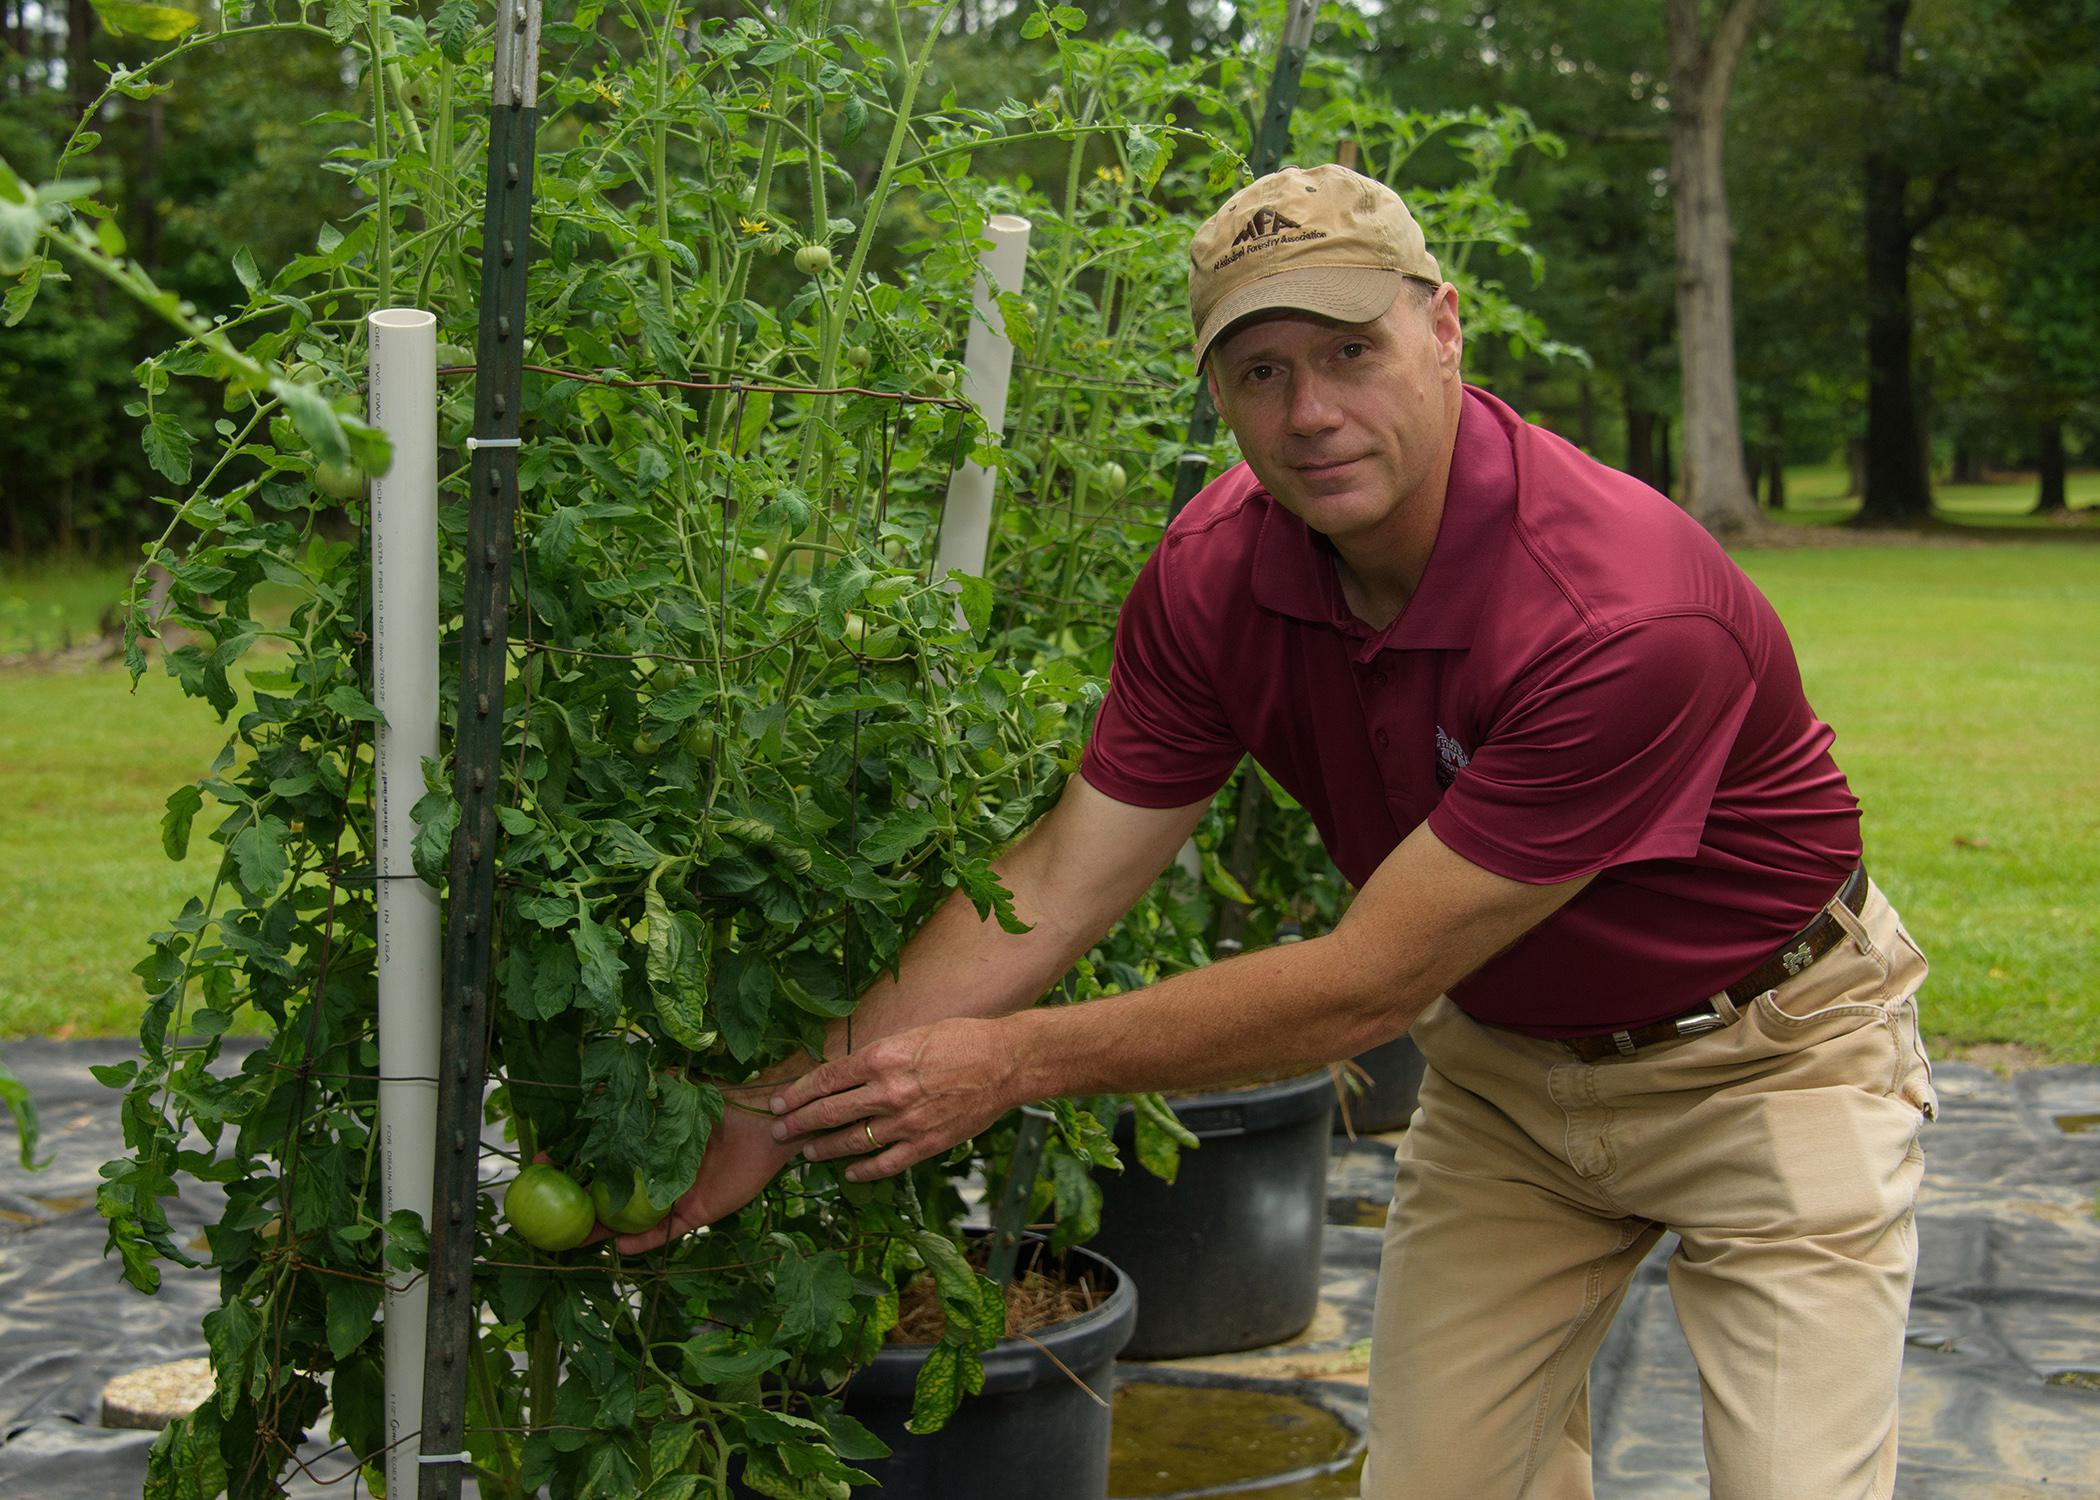 A man wearing a baseball cap reaches toward a green tomato growing on a large, caged plant.